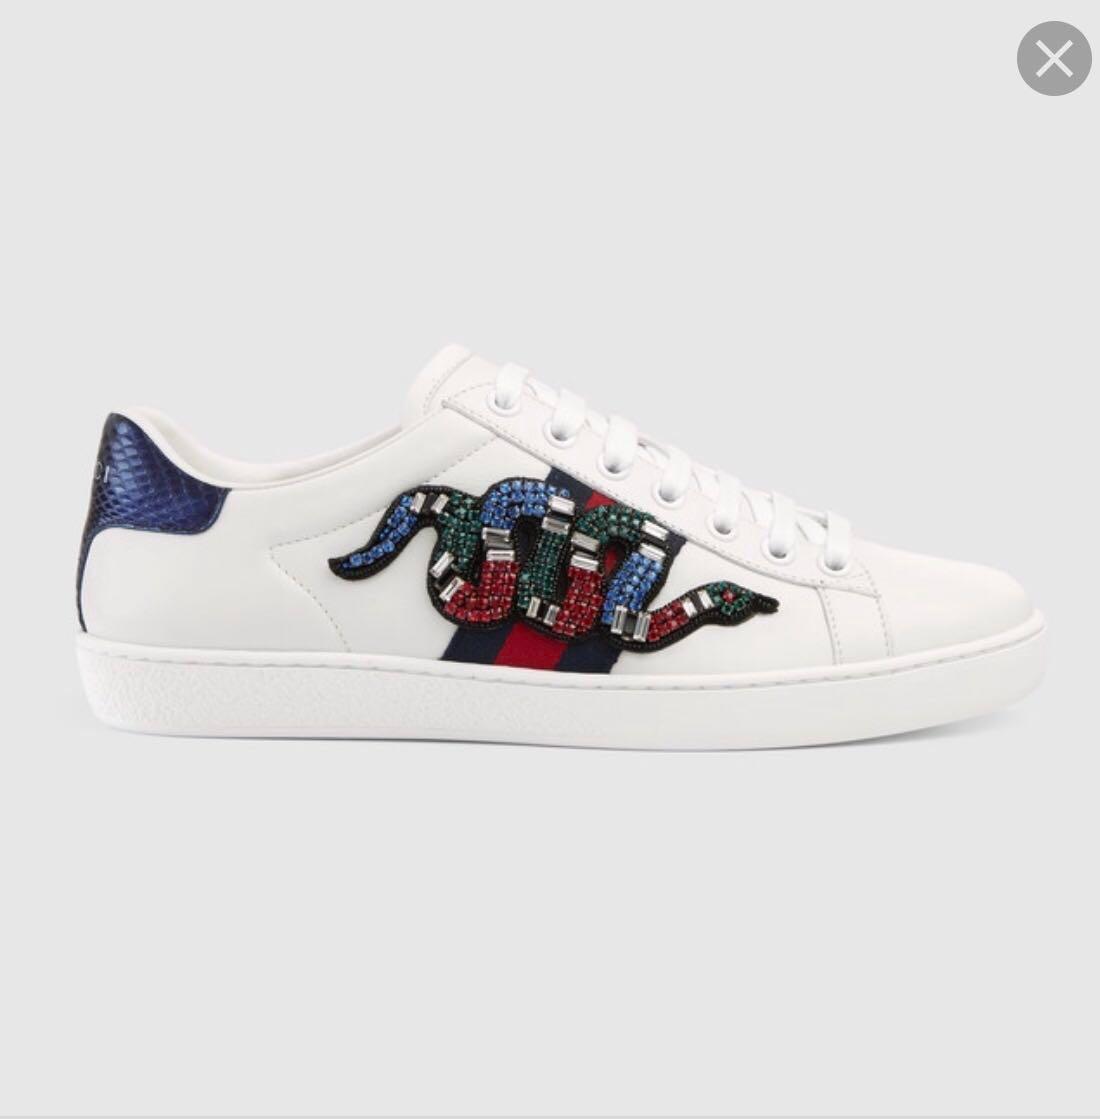 ace embroidered sneaker price